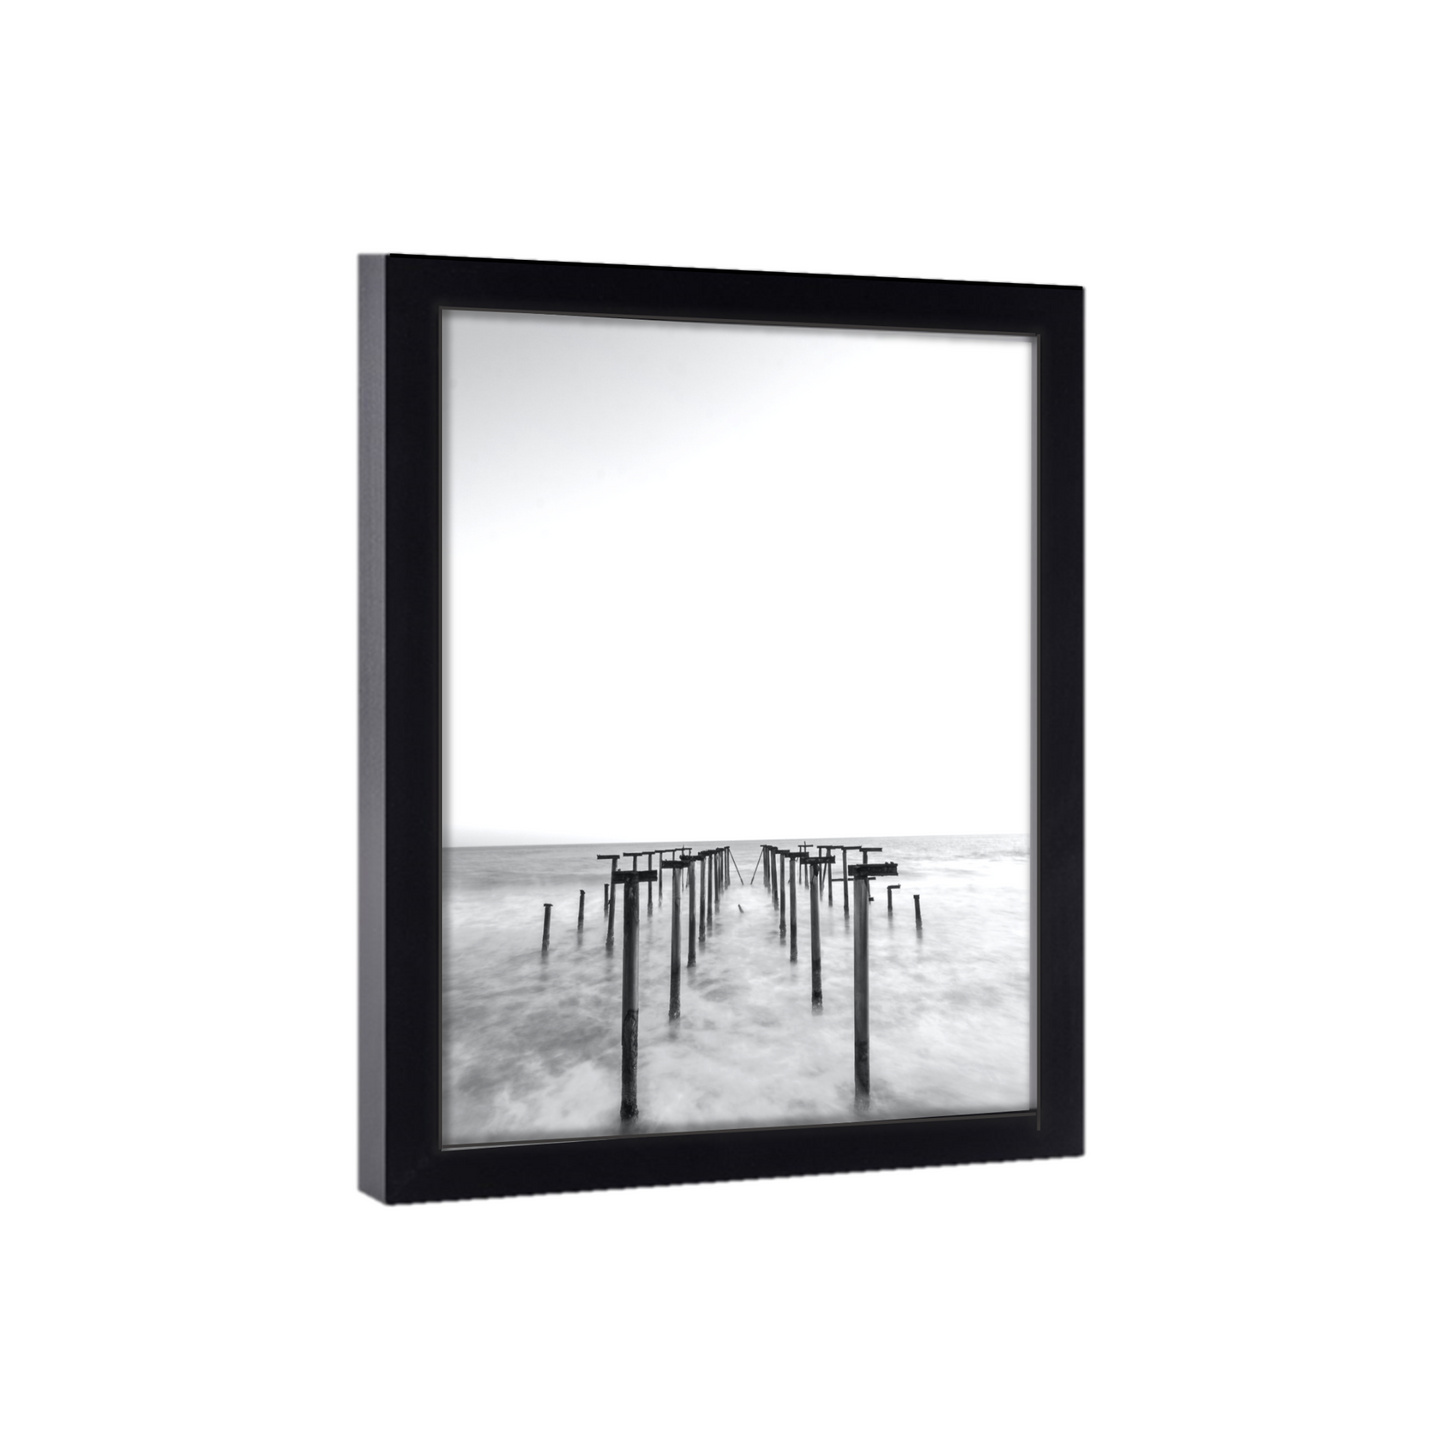 Gallery Wall 19x12 Picture Frame Black Wood 19x12  Poster Size